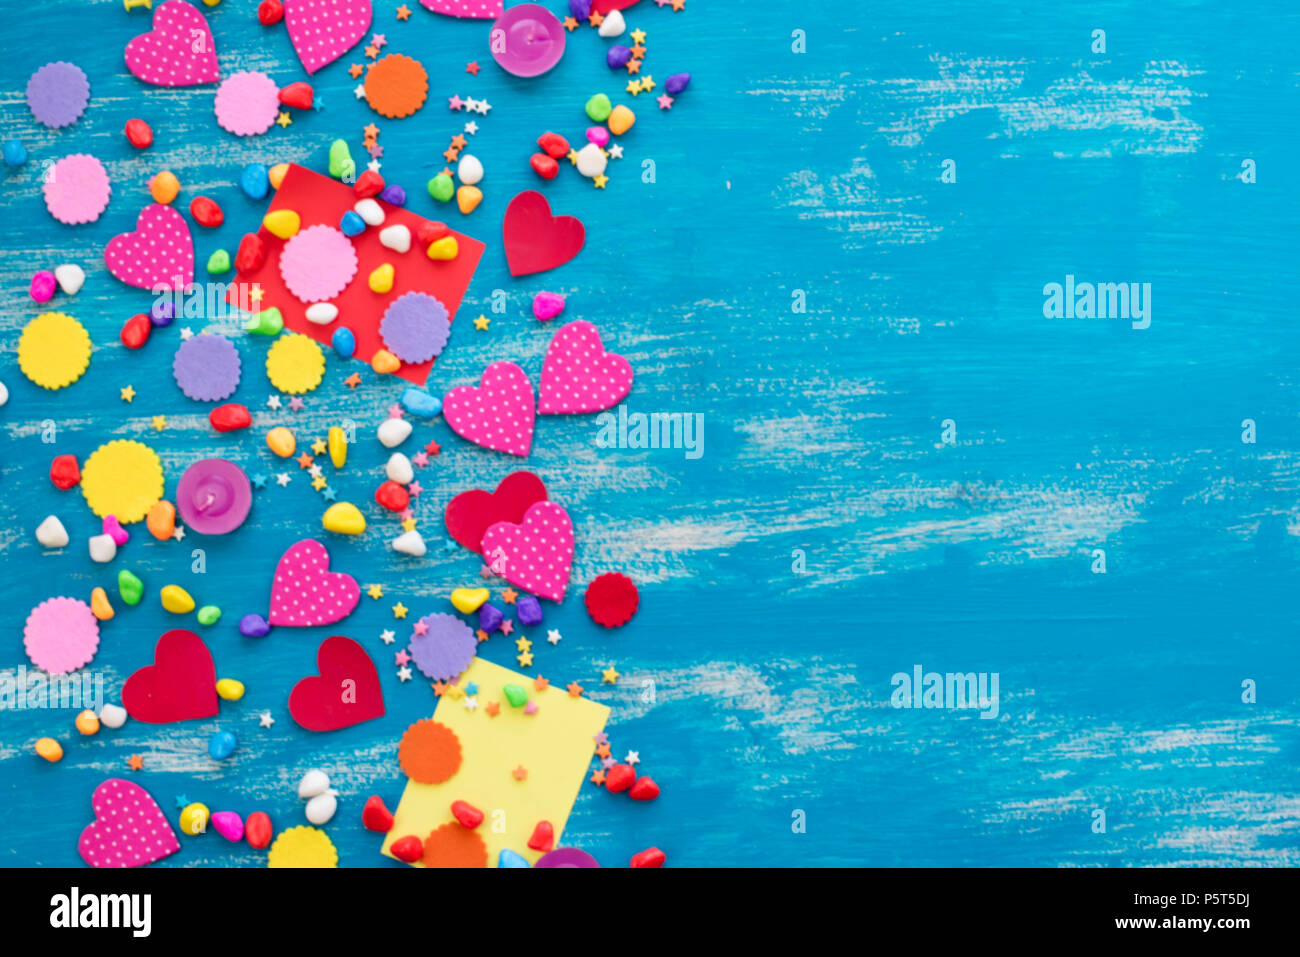 Defocus Festive confetti background heart candy color saturated. Wood old blue background with copy space flat lay Stock Photo